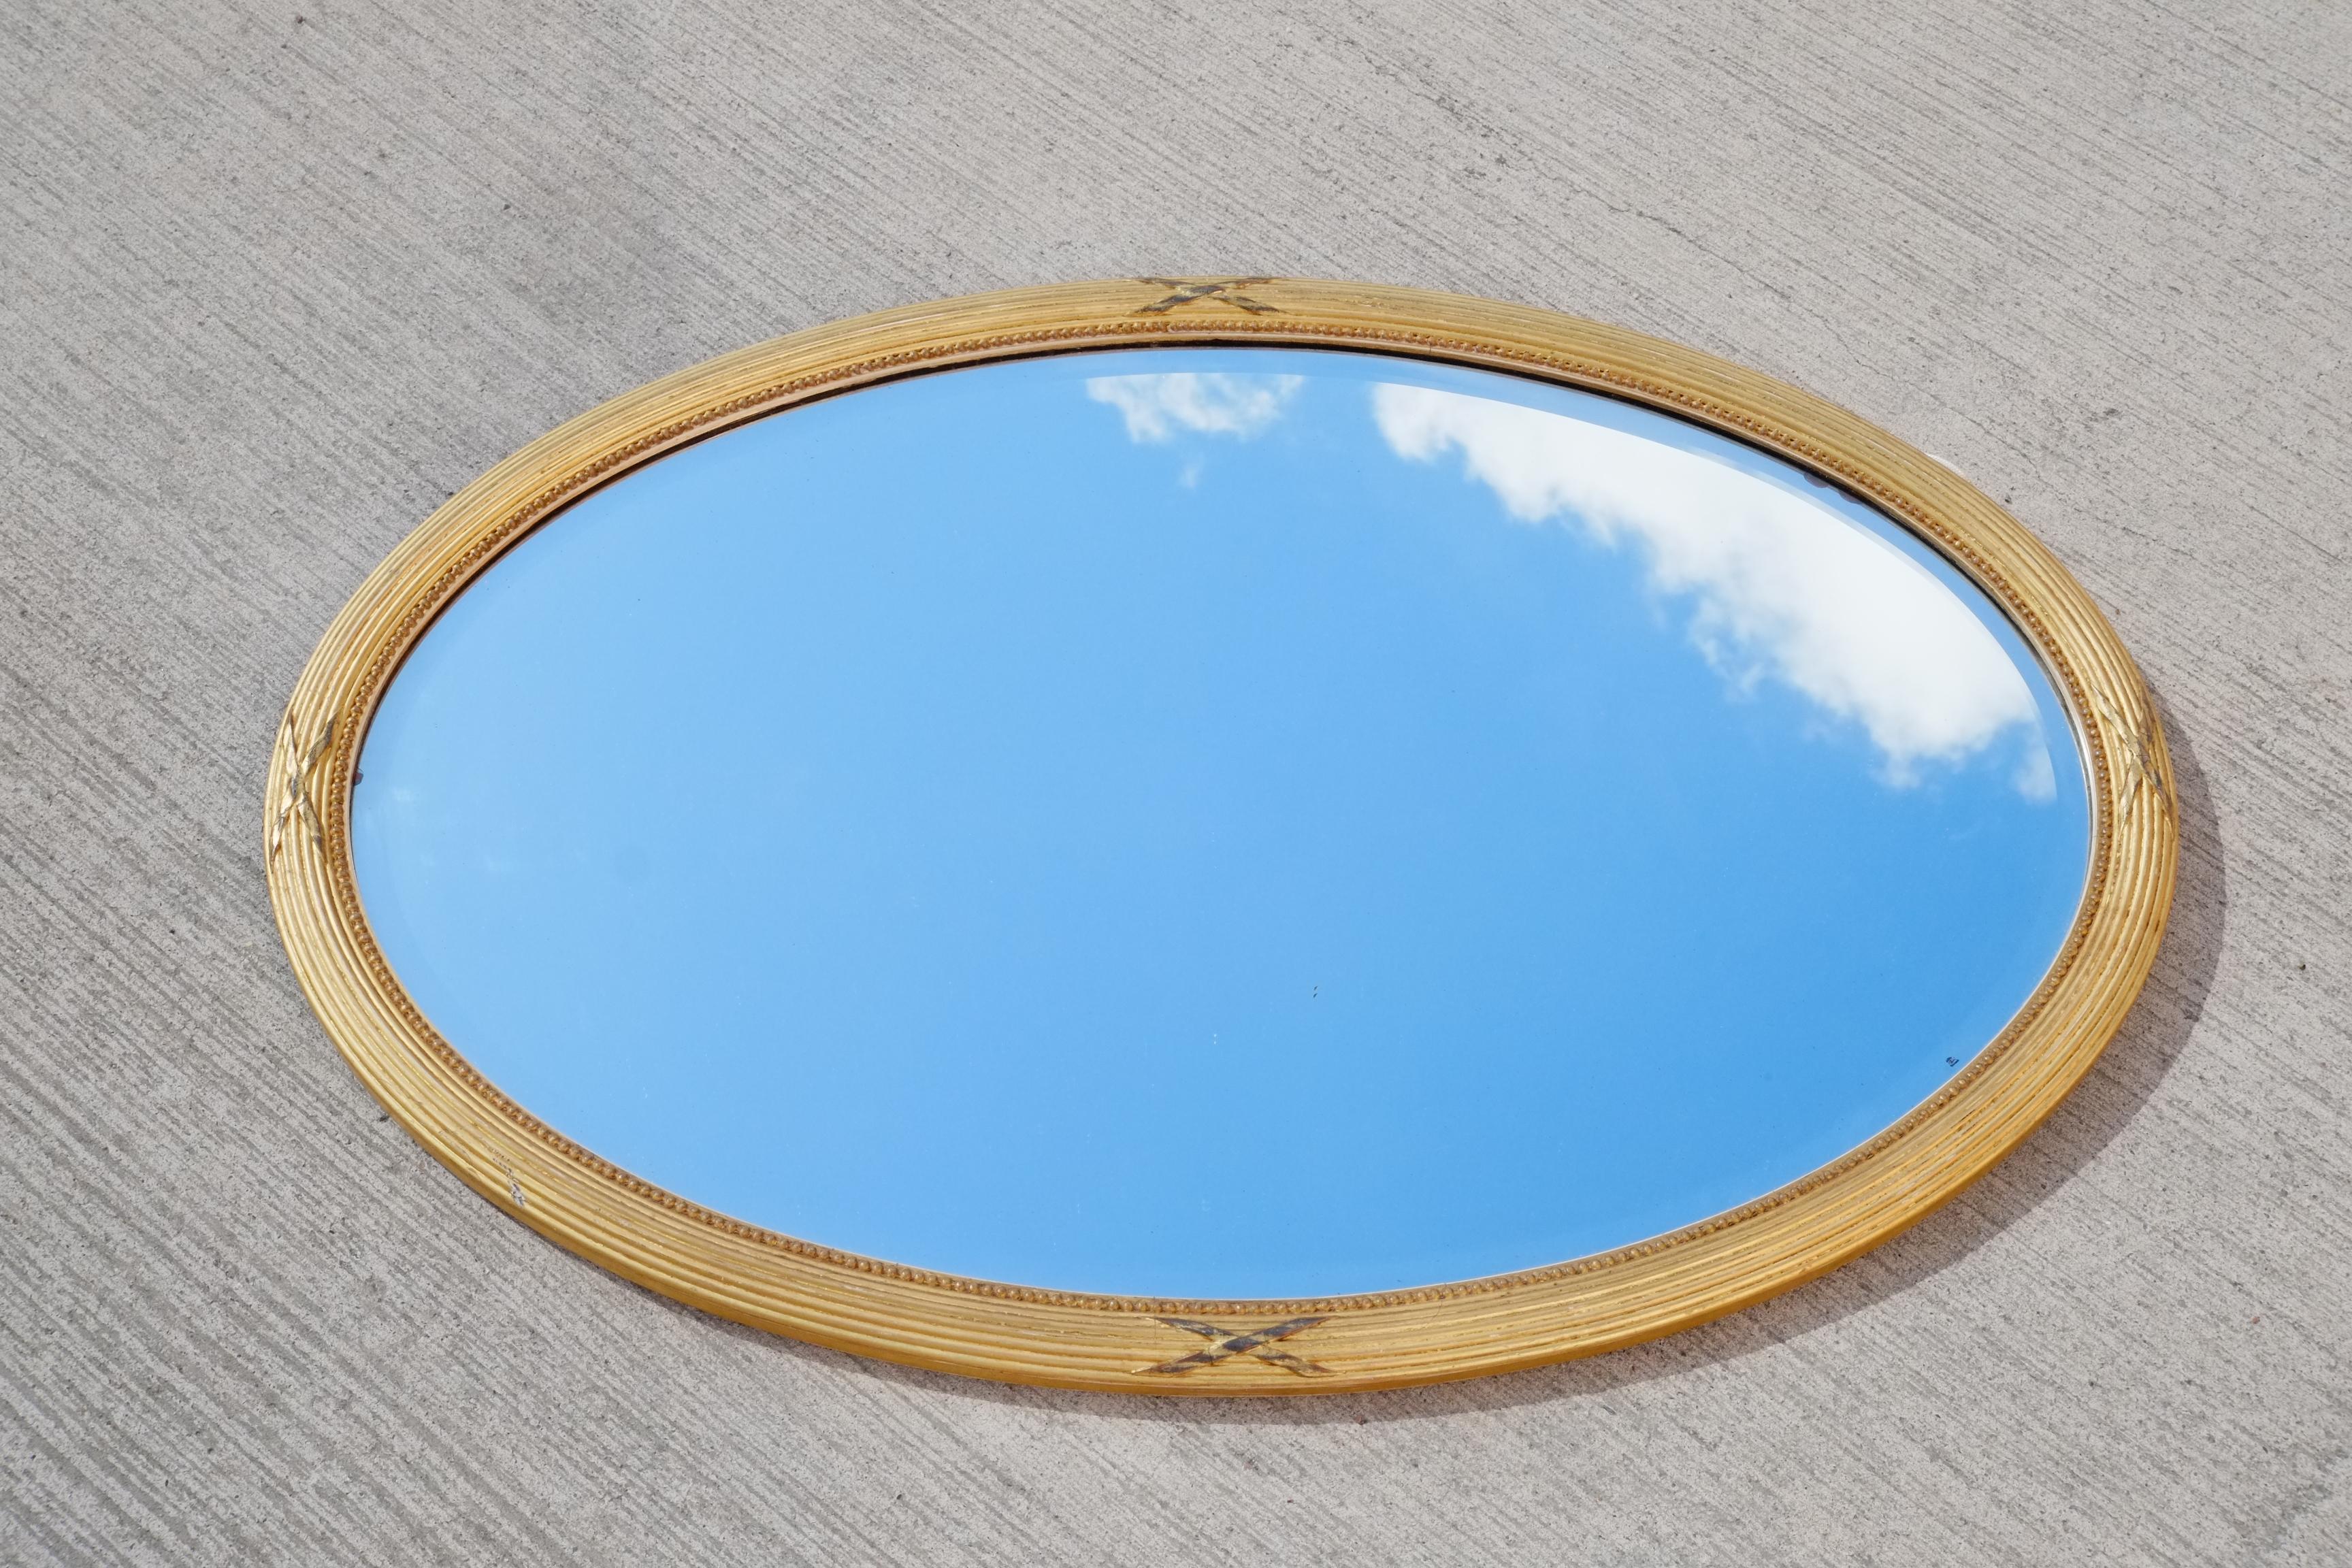 A beautiful large early 20th century gilt wood mirror. The frame is a large oval with reeded and X shaped detailing. A very soft gold colour which has a modest and elegant feel. Deep bevelled edge to the mirrored glass. This piece would look amazing